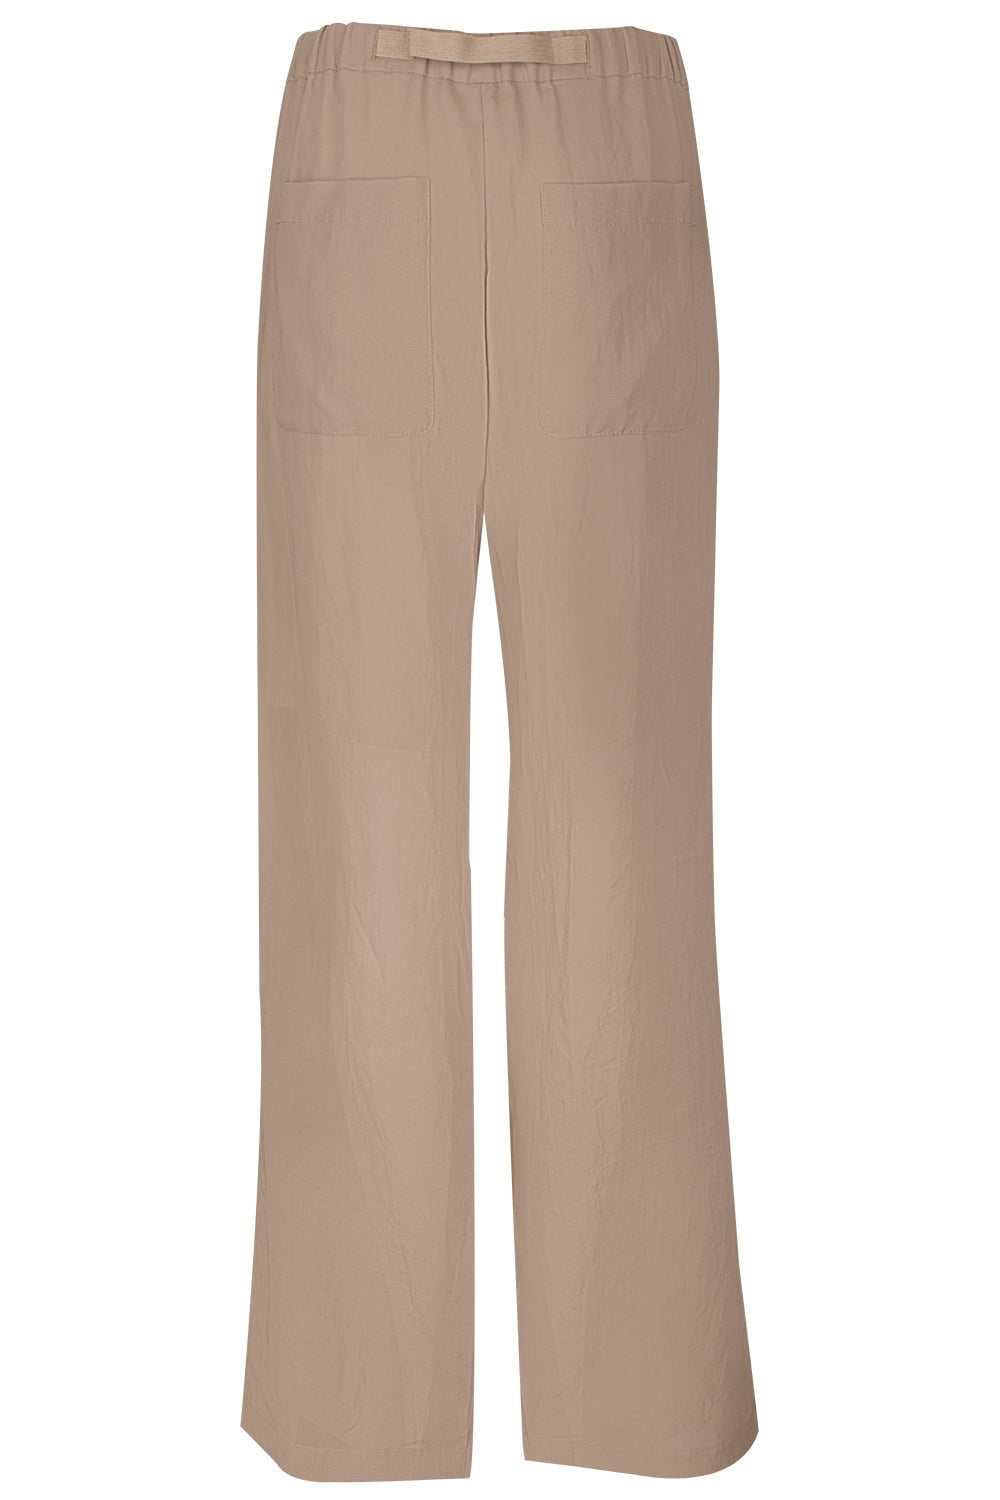 BRUNELLO CUCINELLI-Belted Pant-